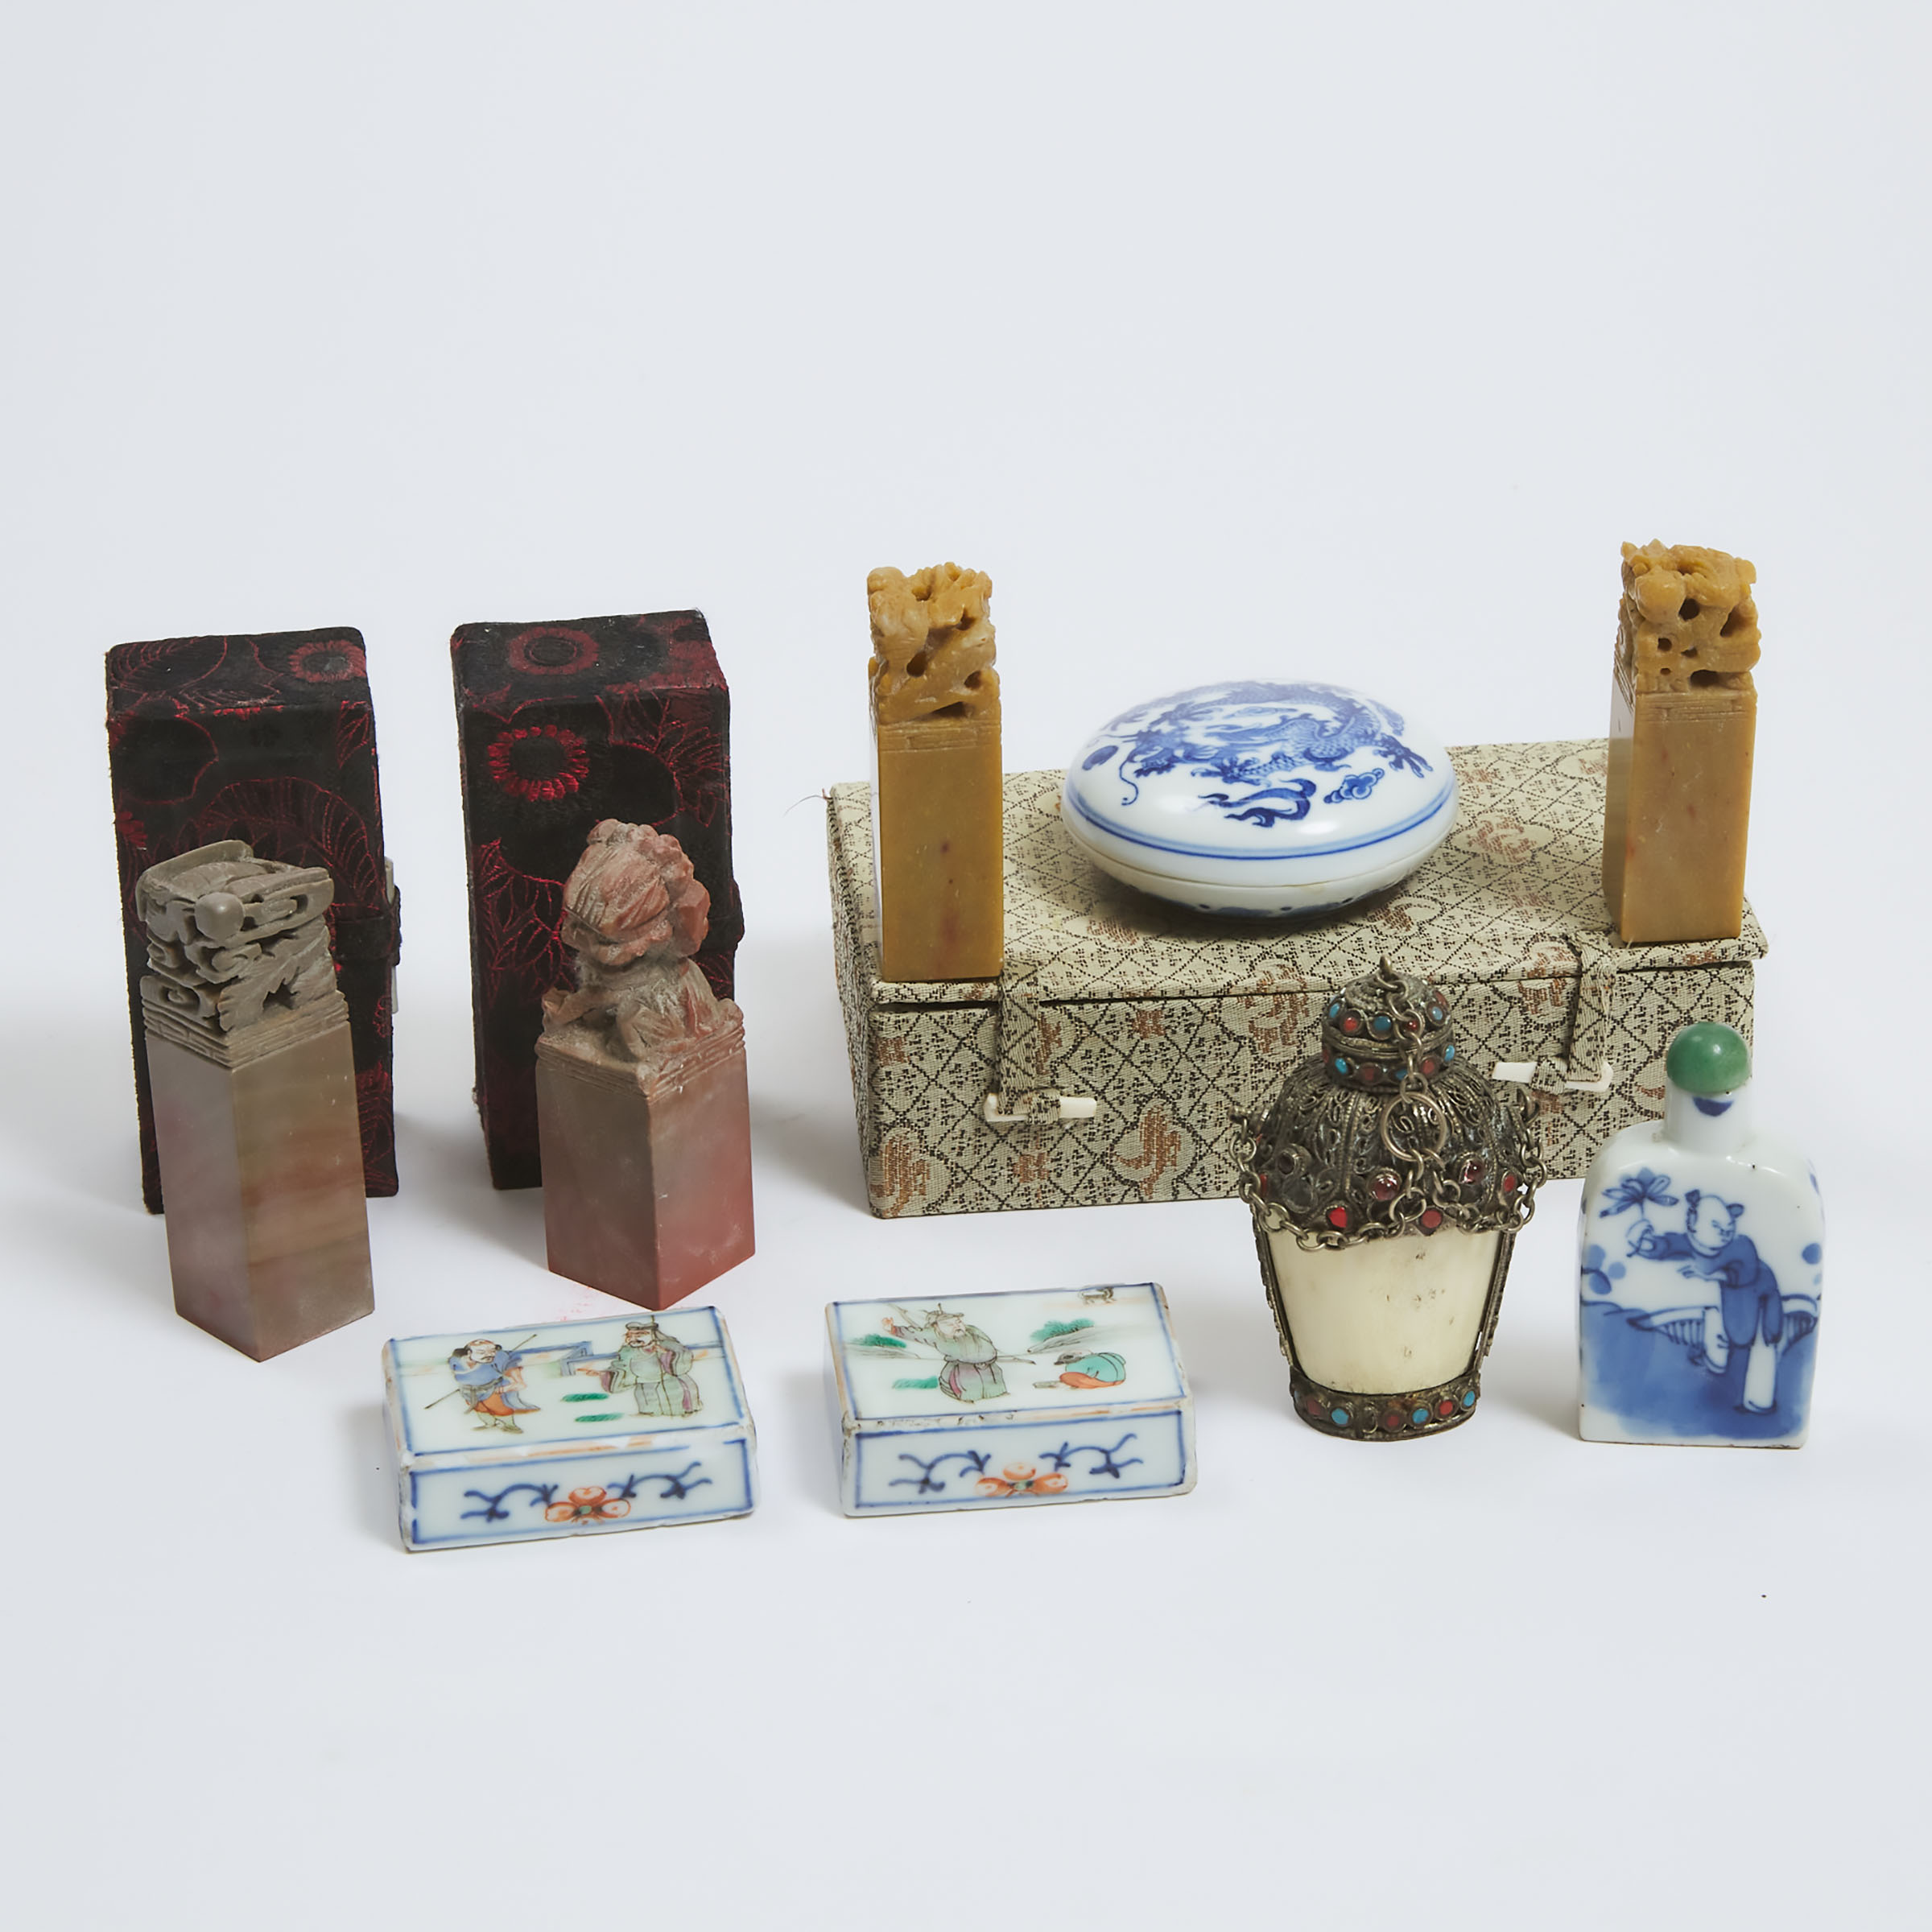 A Group of Nine Soapstone Seals, Snuff Bottles, and Other Miscellaneous Pieces, 19th/20th Century